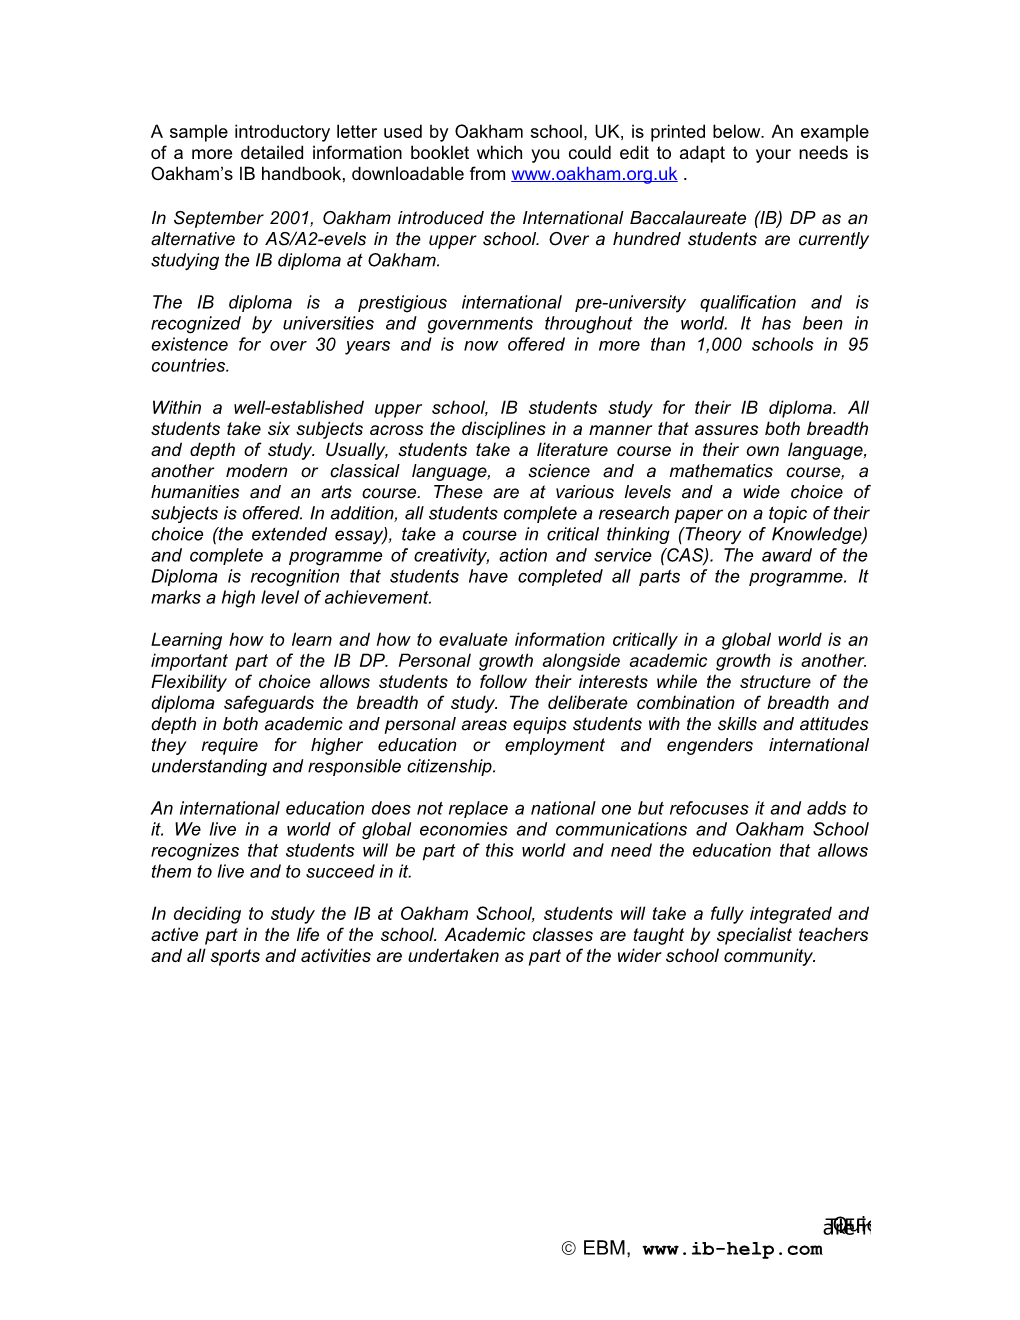 A Sample Introductory Letter Used by Oakham School, UK, Is Printed Below